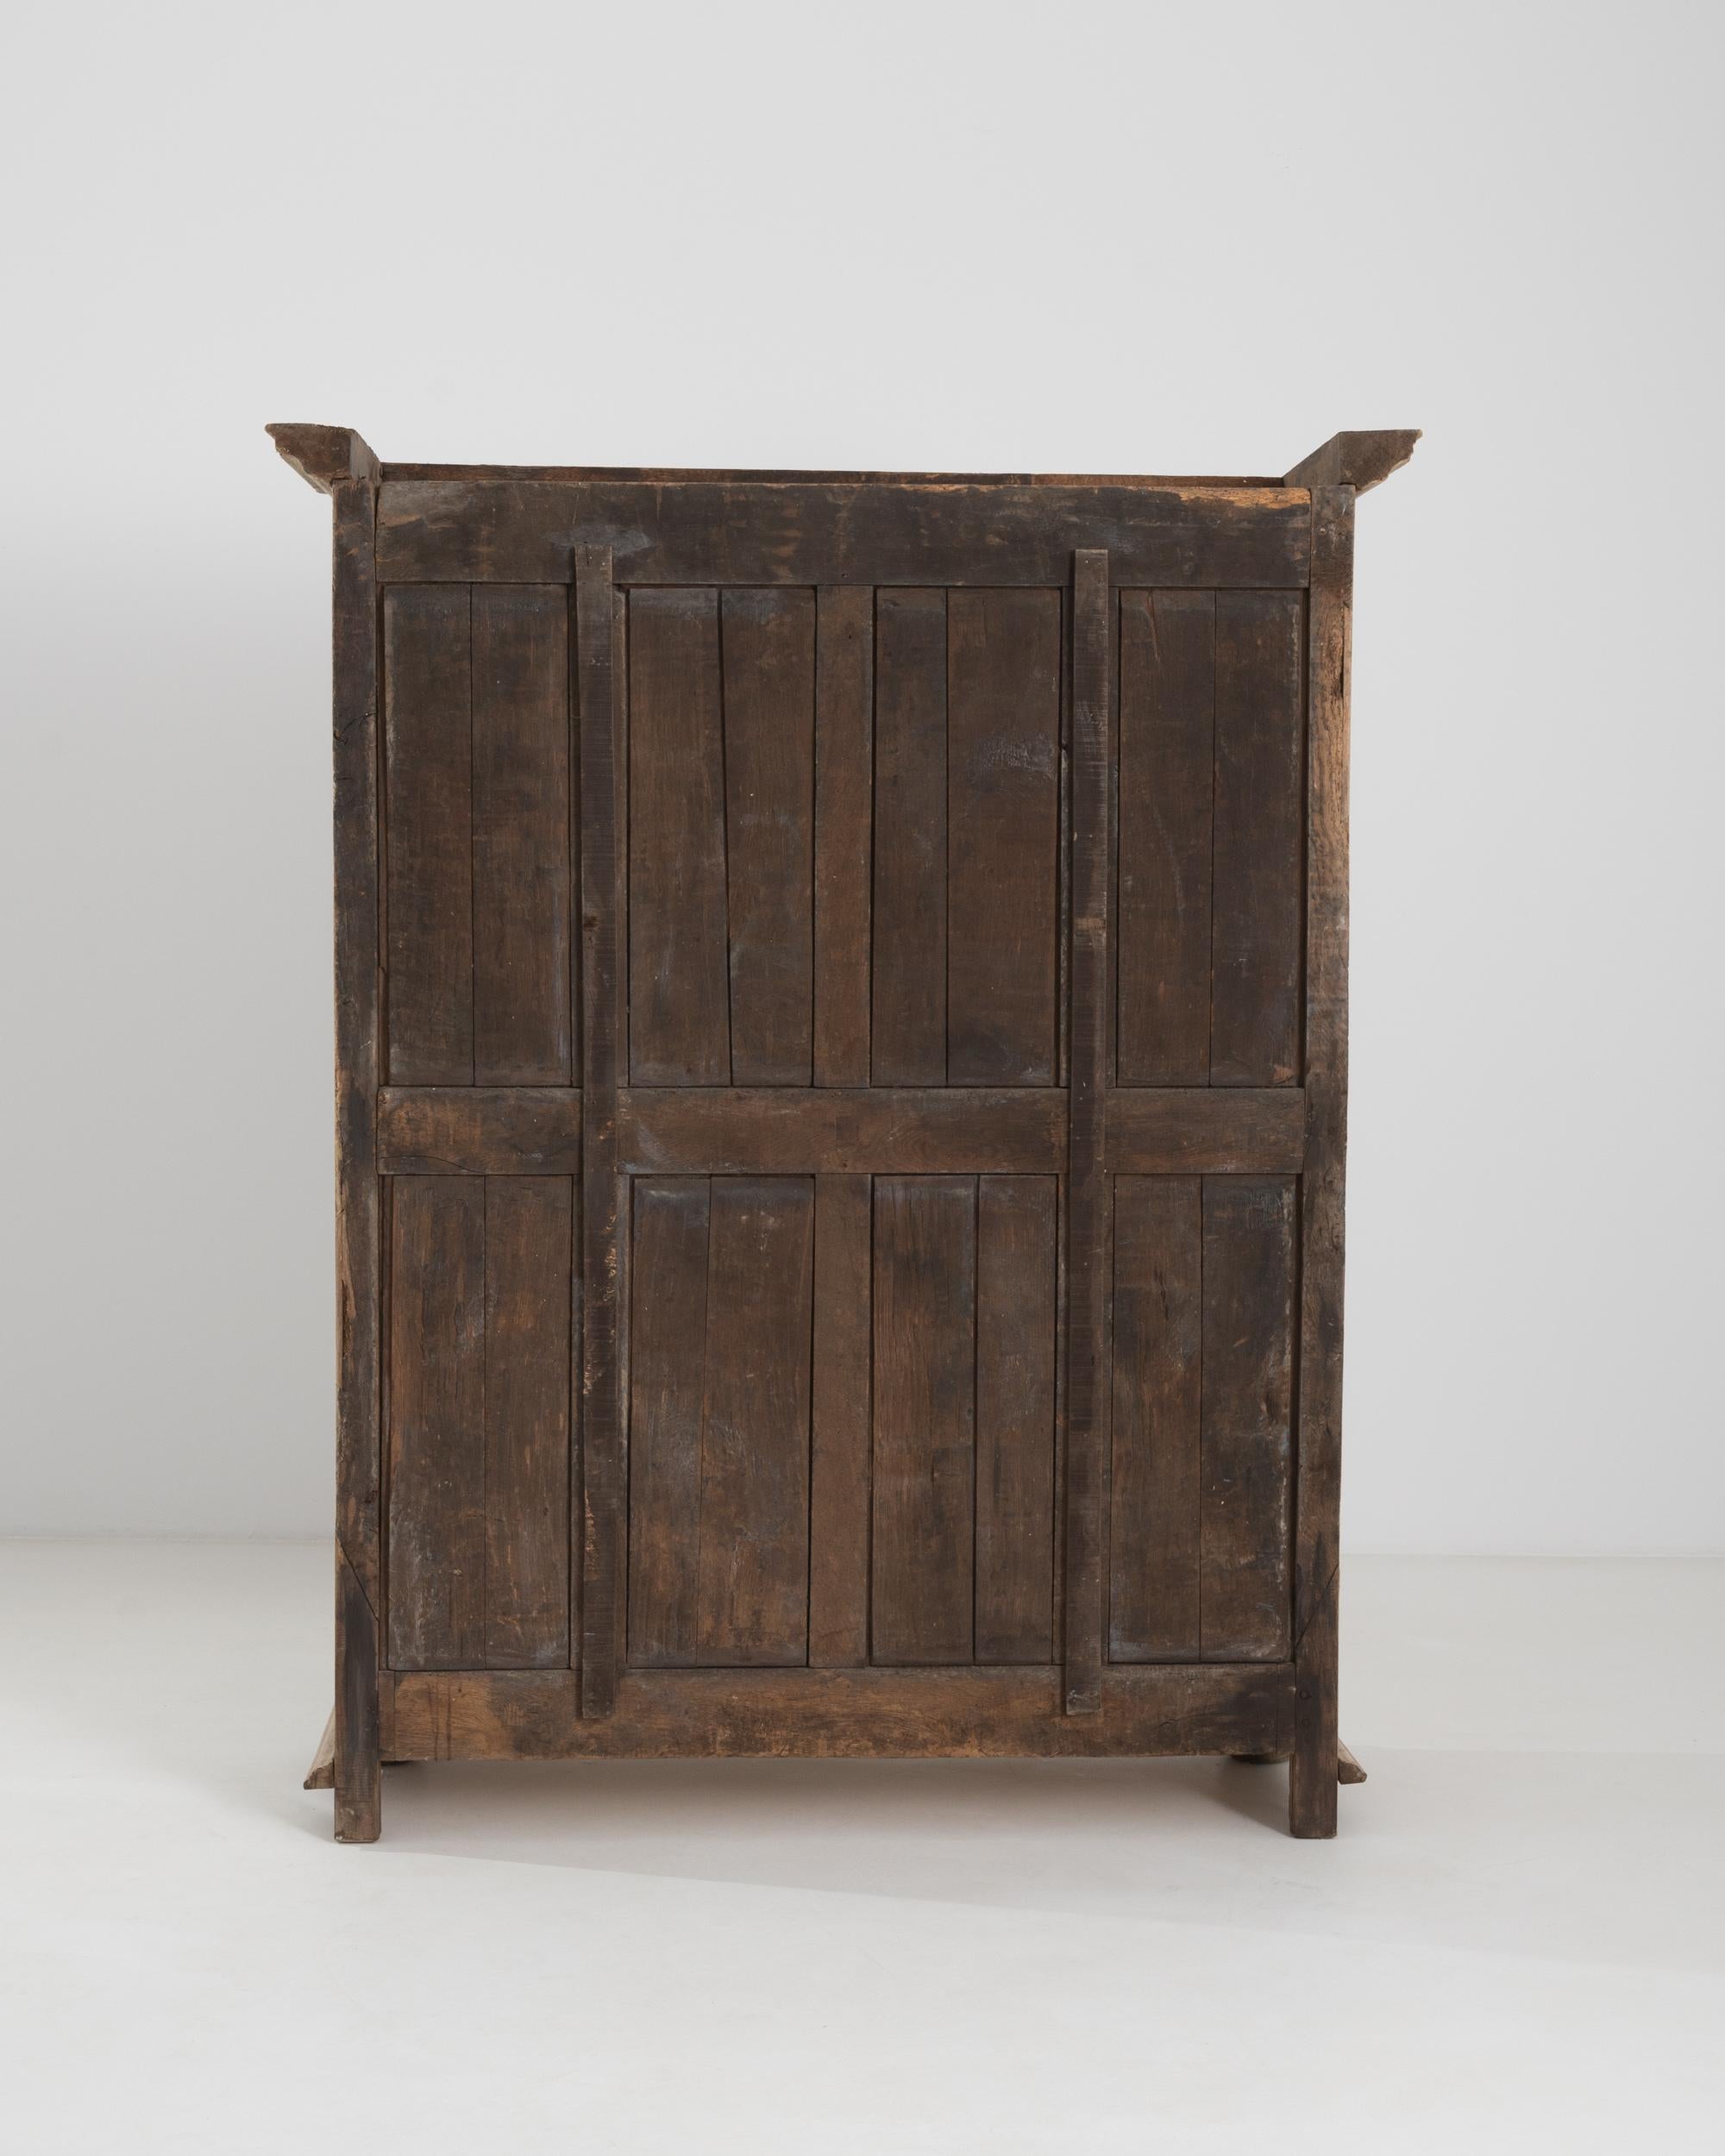 French Provincial Early 19th Century French Wooden Cabinet For Sale